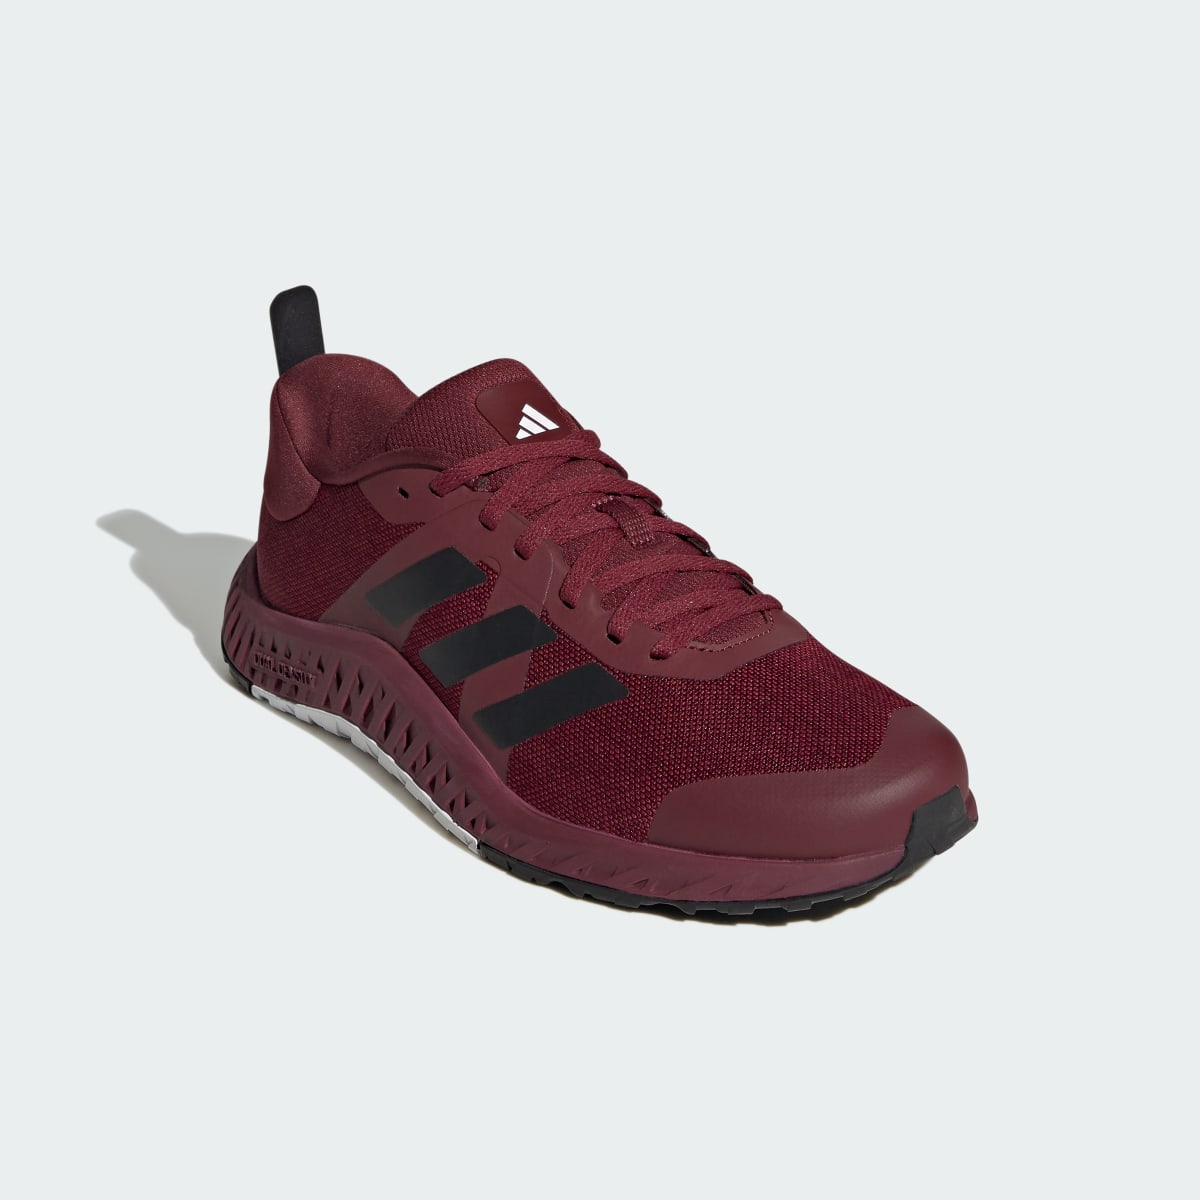 Adidas Everyset Trainer Shoes. 5